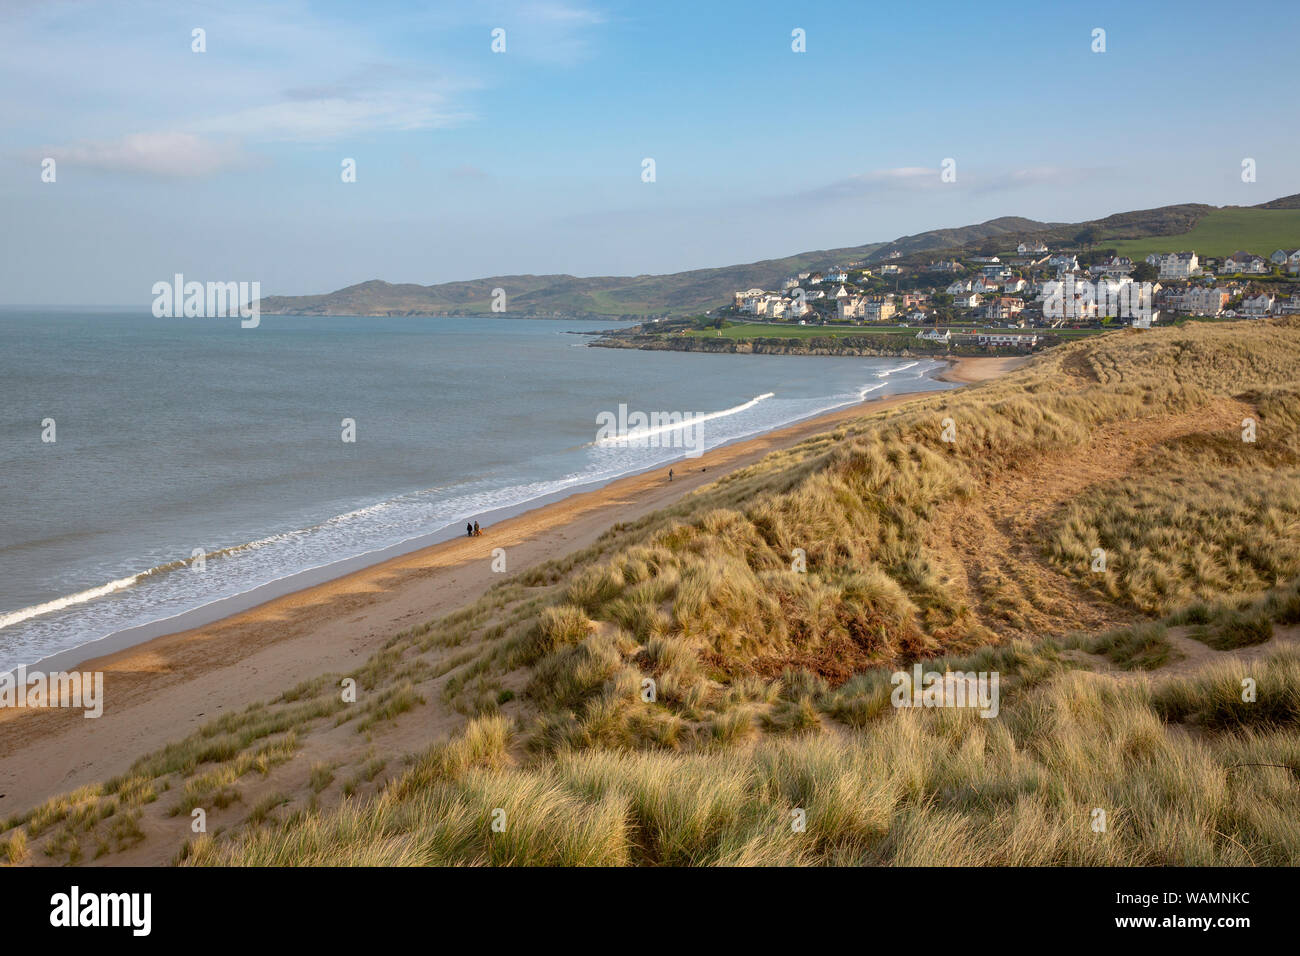 Sand dunes, beach and town of Woolacombe in North Devon, England Stock Photo